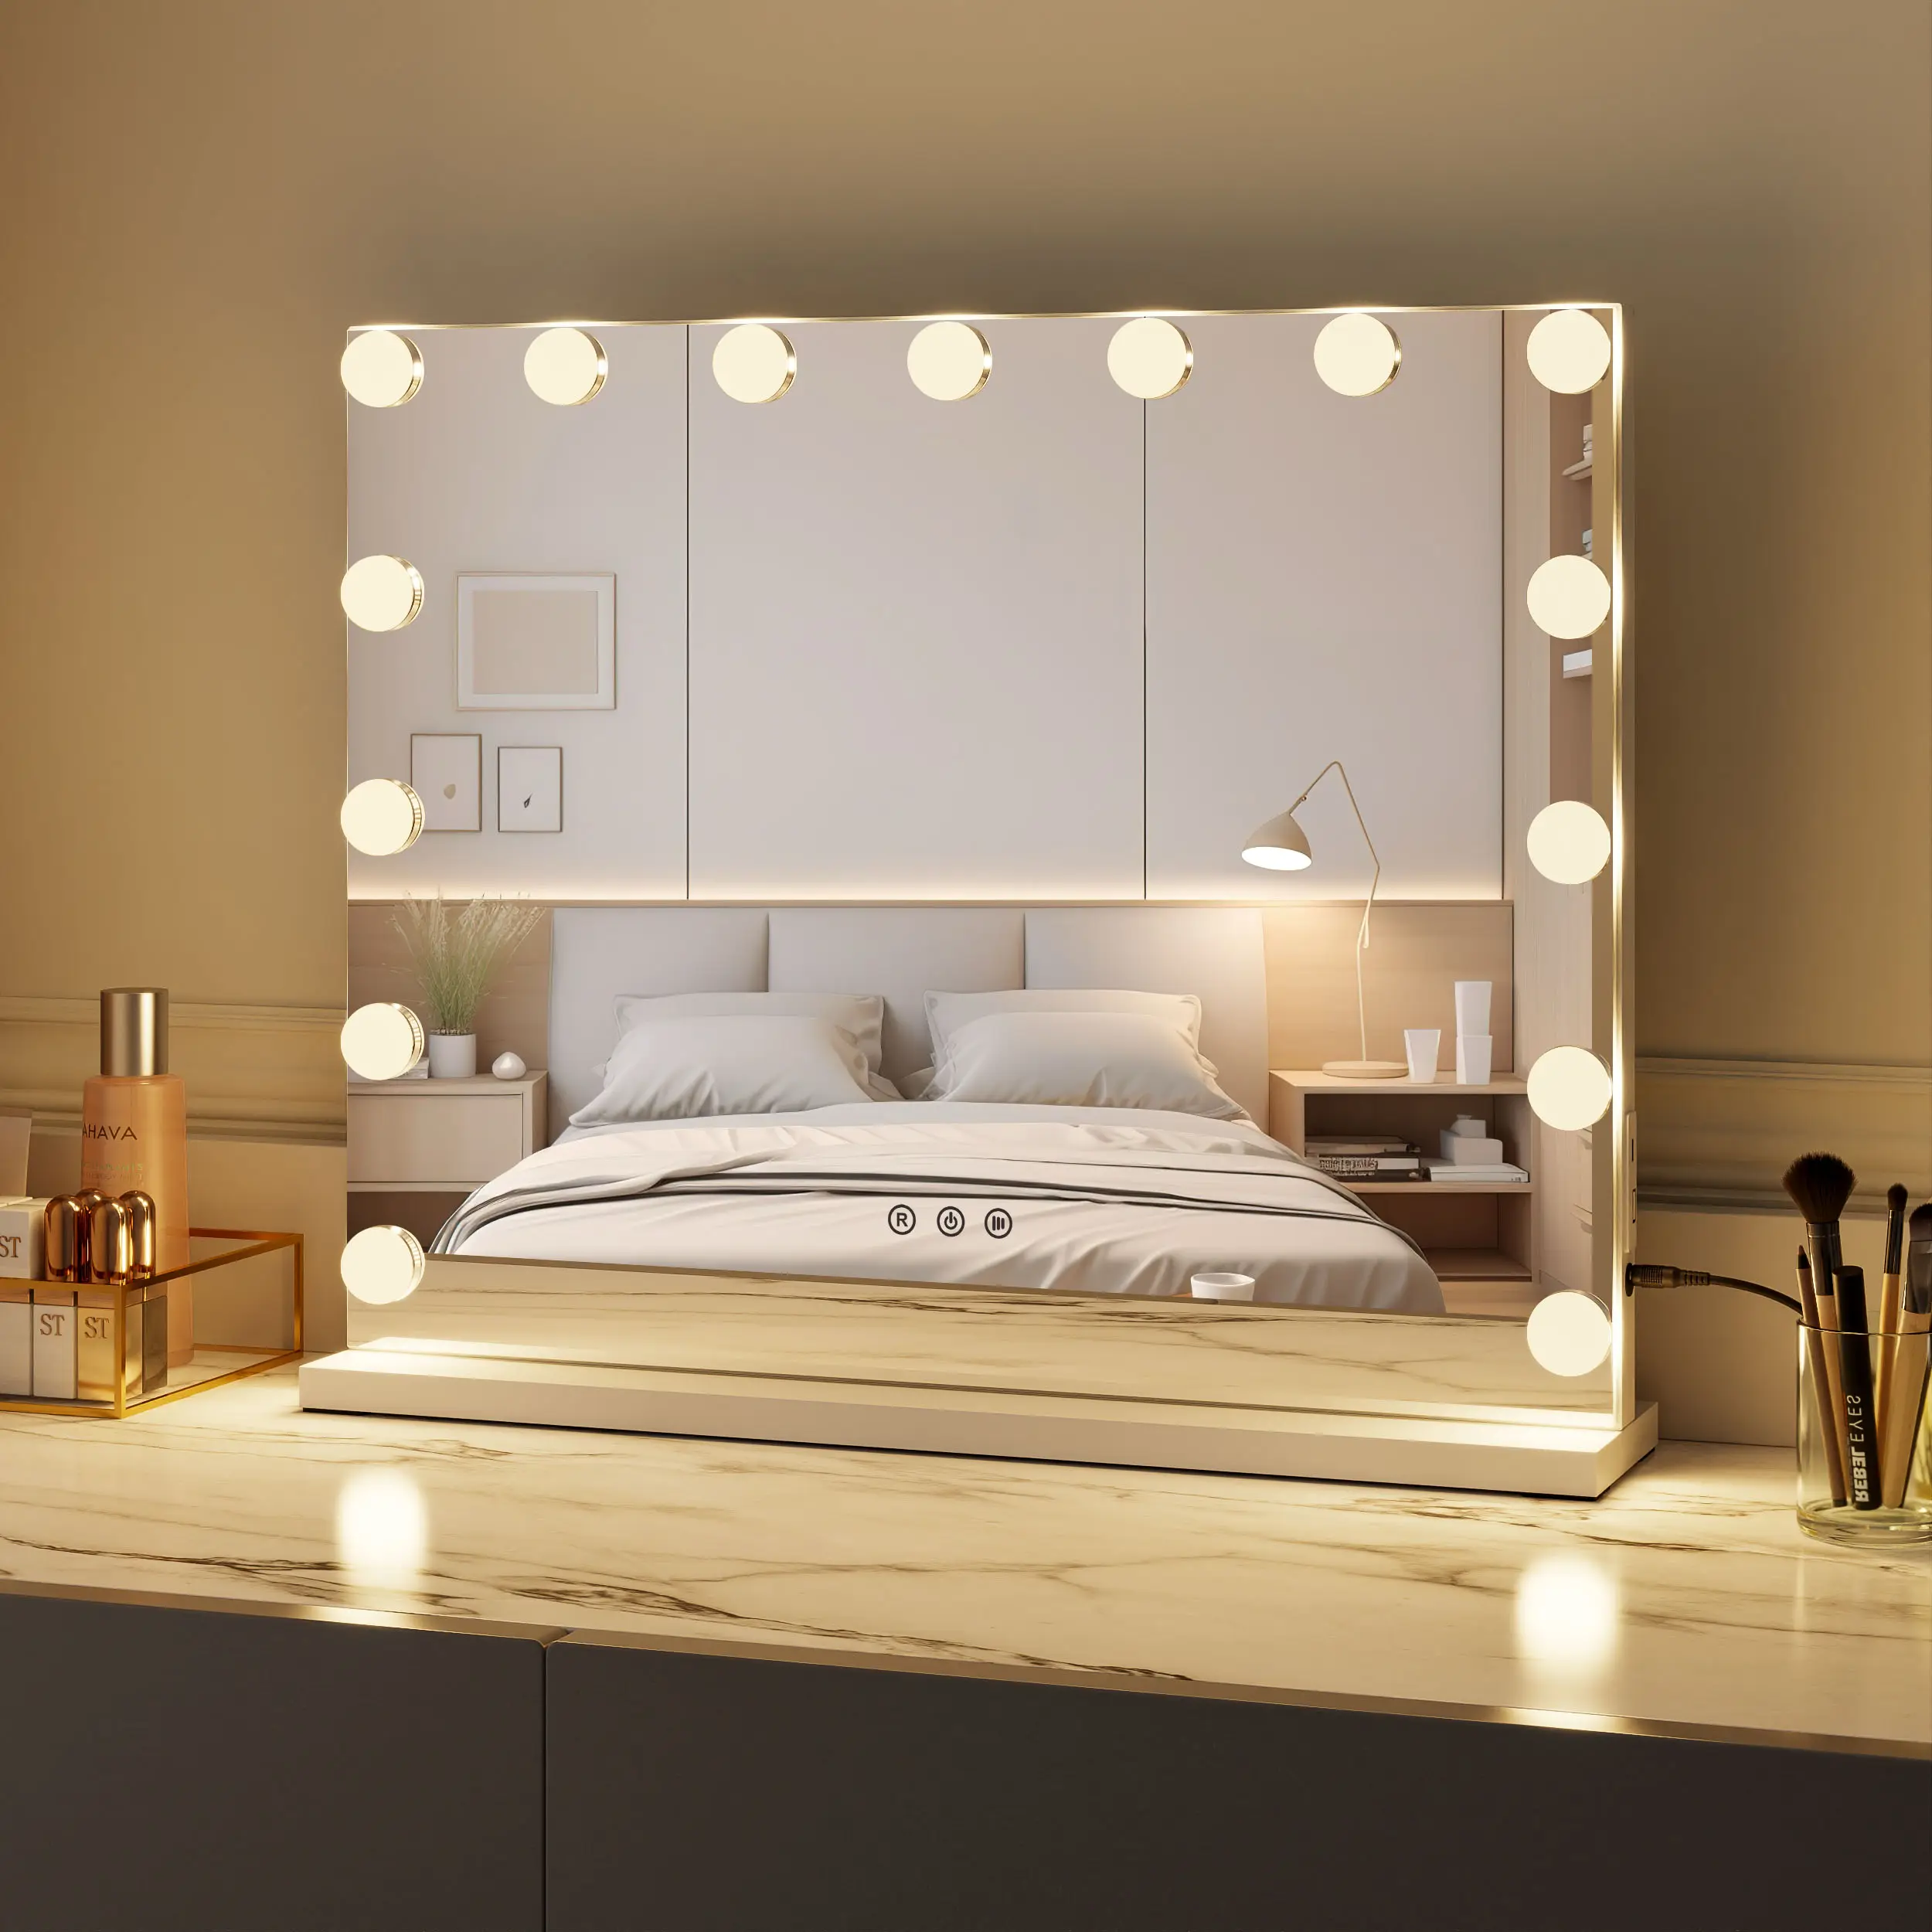 58x46cm Type-C 15 Dimmable Led Bulbs White Led Makeup Metal Frame Cosmetic Adjustable Brightness Hollywood Vanity Mirror